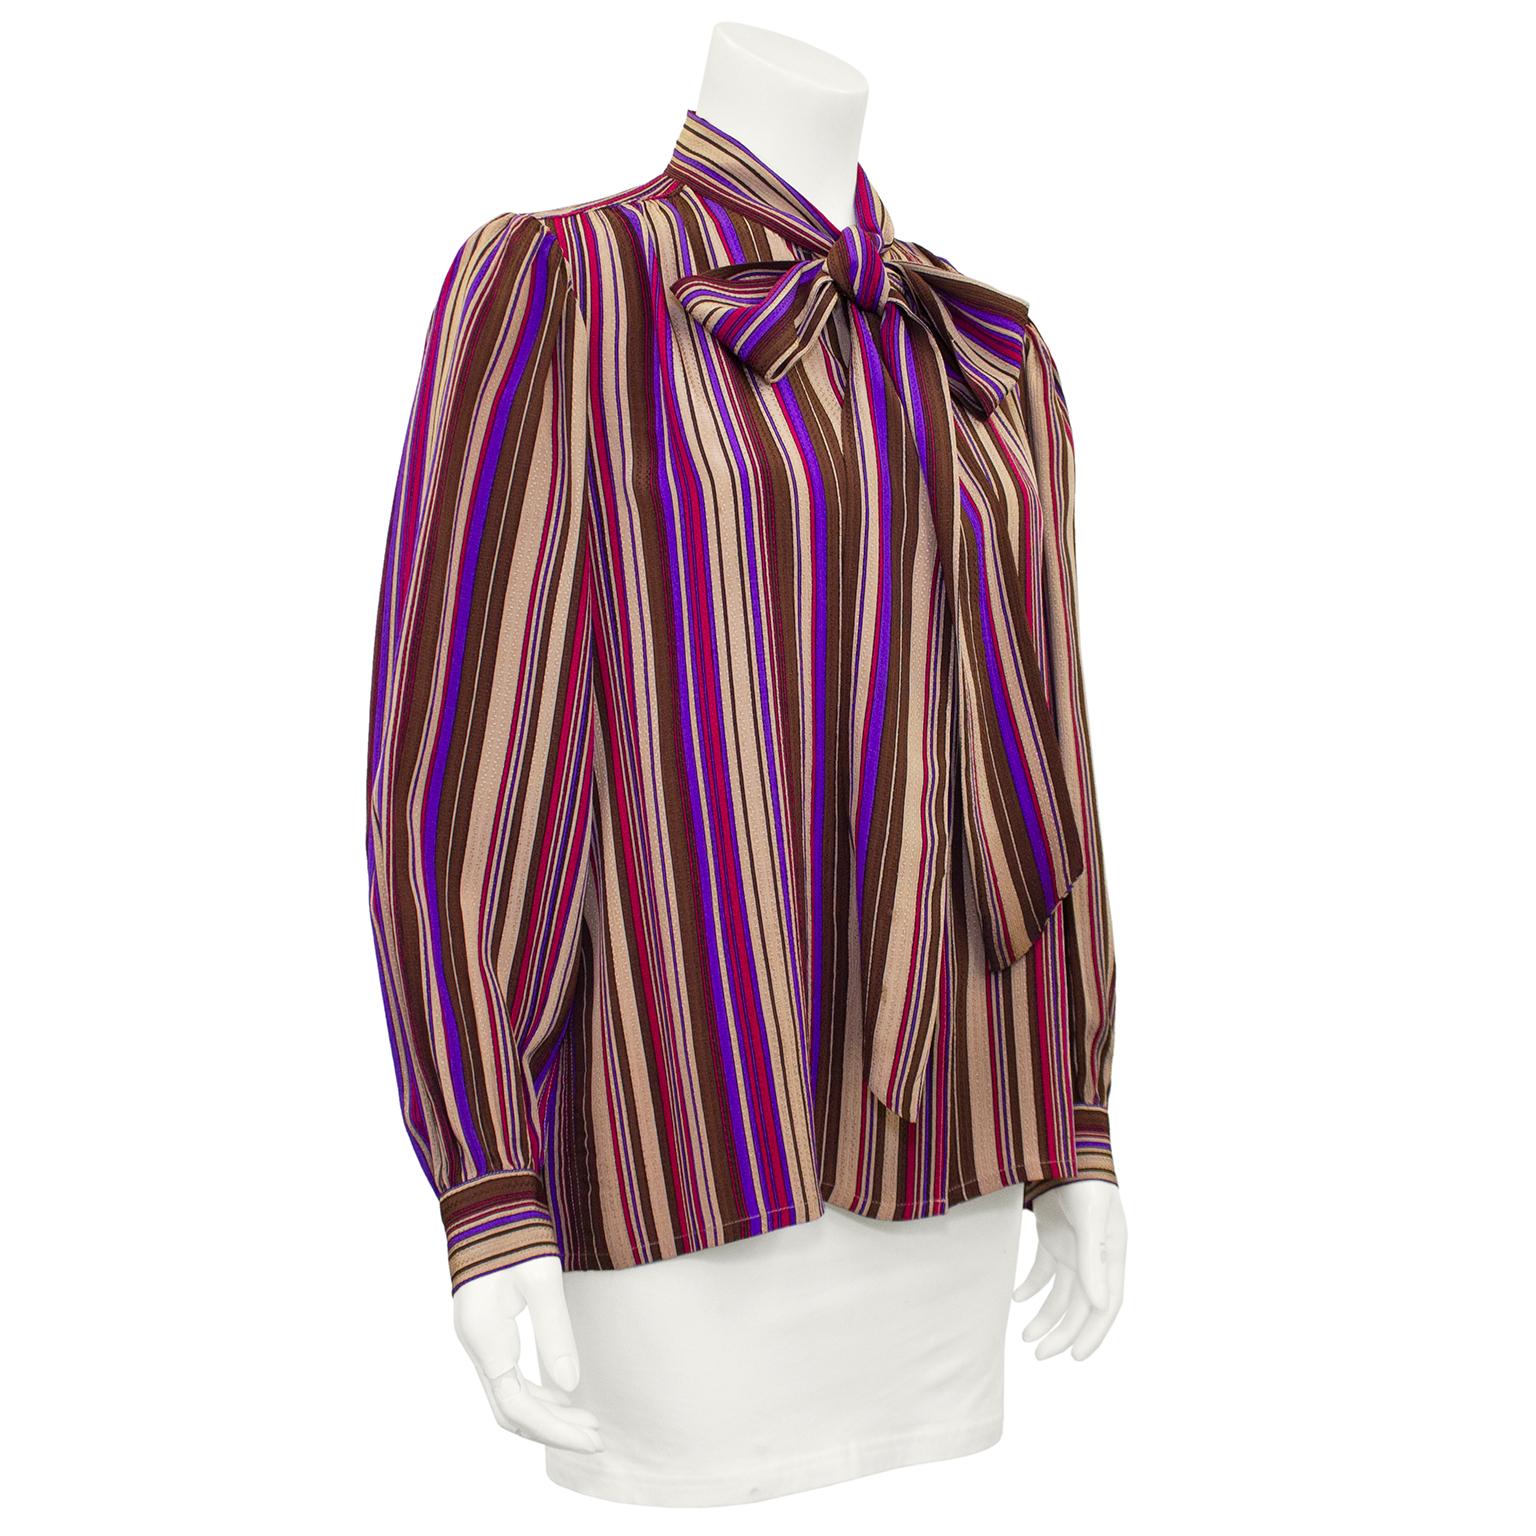 1970s Yves Saint Laurent Rive Gauche blouse. Purple, brown, tan and red vertical stripe silk jacquard with a pussybow and bishop sleeves. Buttons up centre front. Excellent vintage condition. Marked FR 36, fits like a US size 4-6. Made in